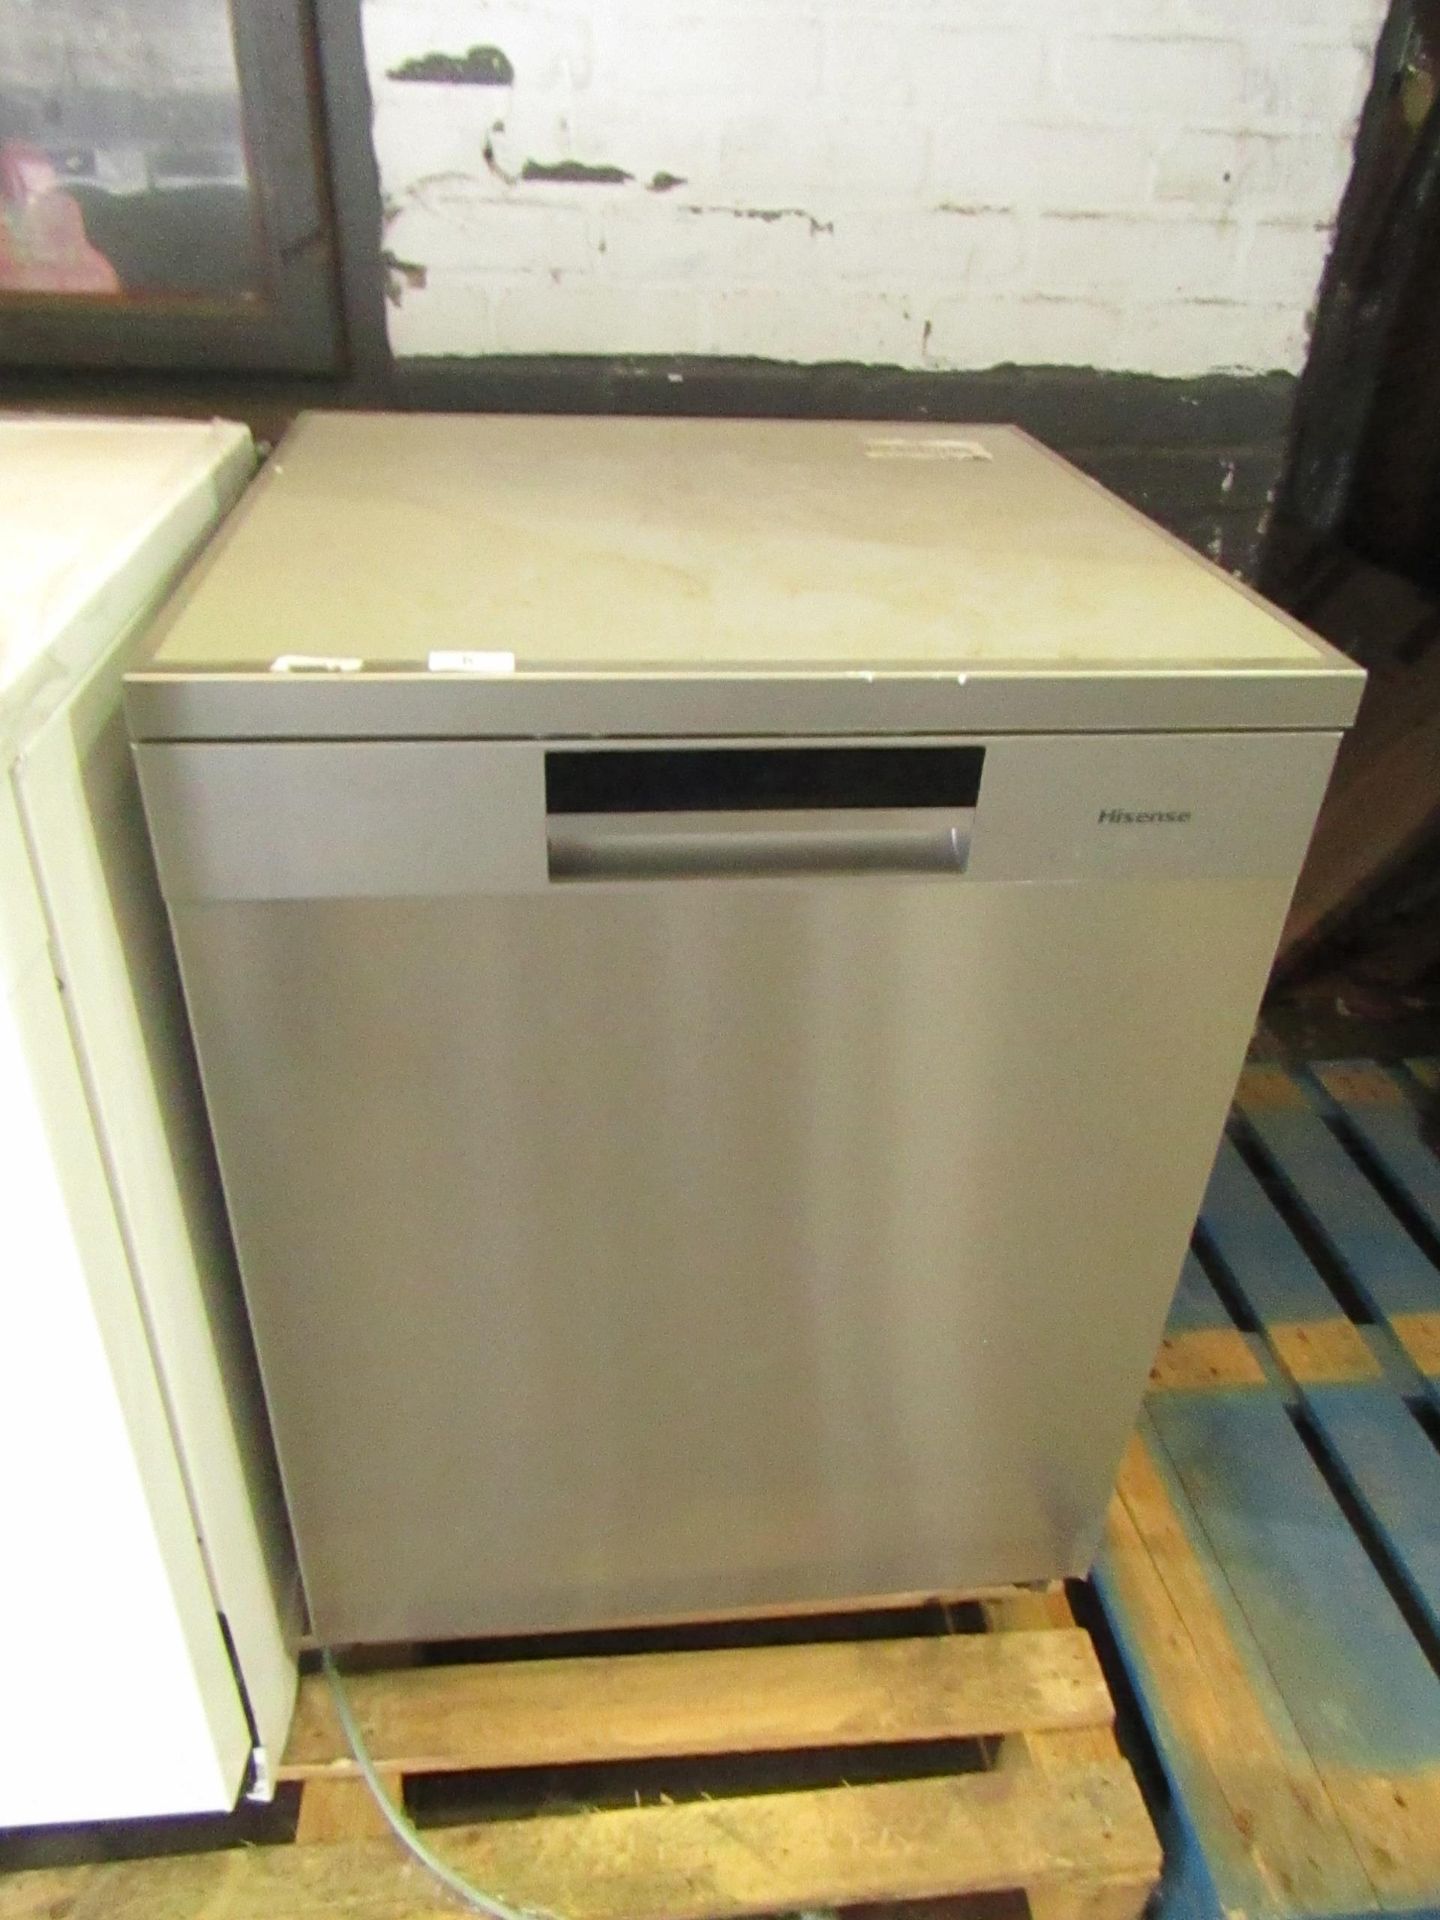 Hisense HS661C60xUK Freestanding Dishwasher, powers on and looks fairly clean inside, the door